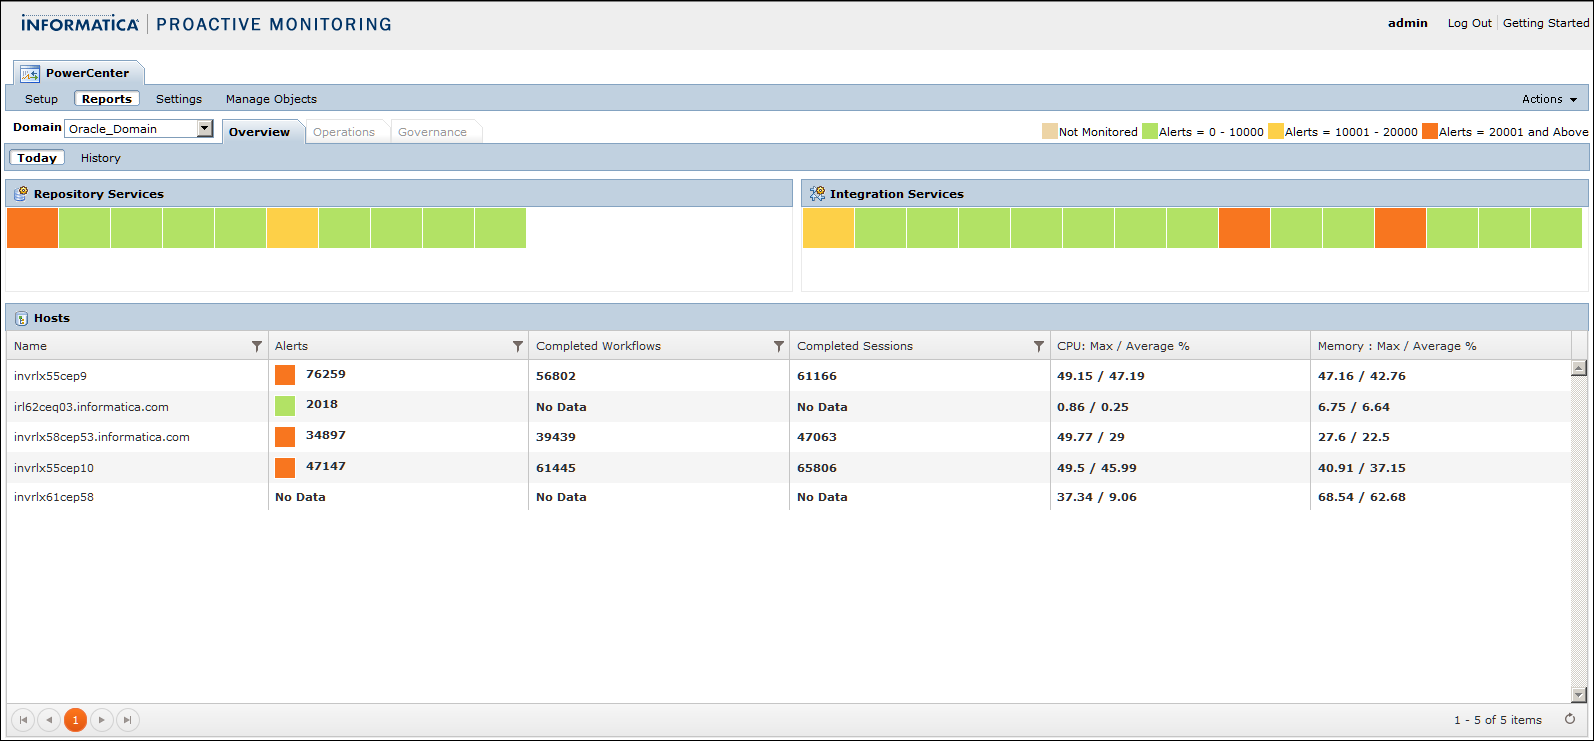 The reports dashboard displays the Overview, Operations, and Governance tabs. The Overview tab displays the Today view with the status of the Repository Services, Integration Services, and hosts in a PowerCenter domain. 
		